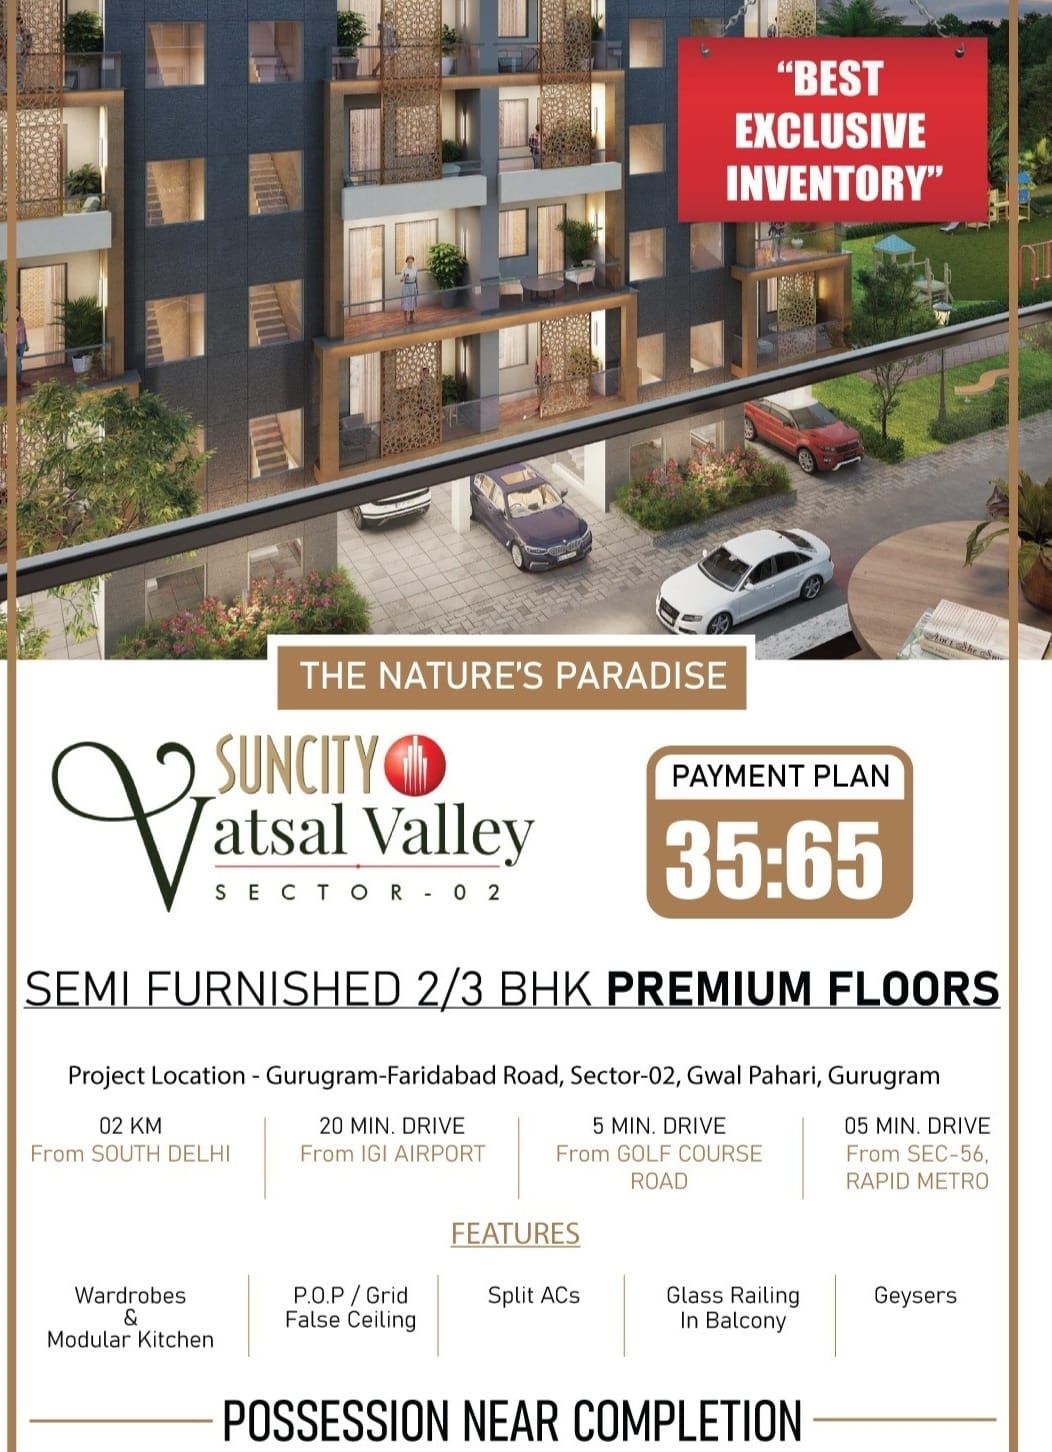 Best exclusive inventory at Suncity Vatsal Valley in Sector 2, Gurgaon Update